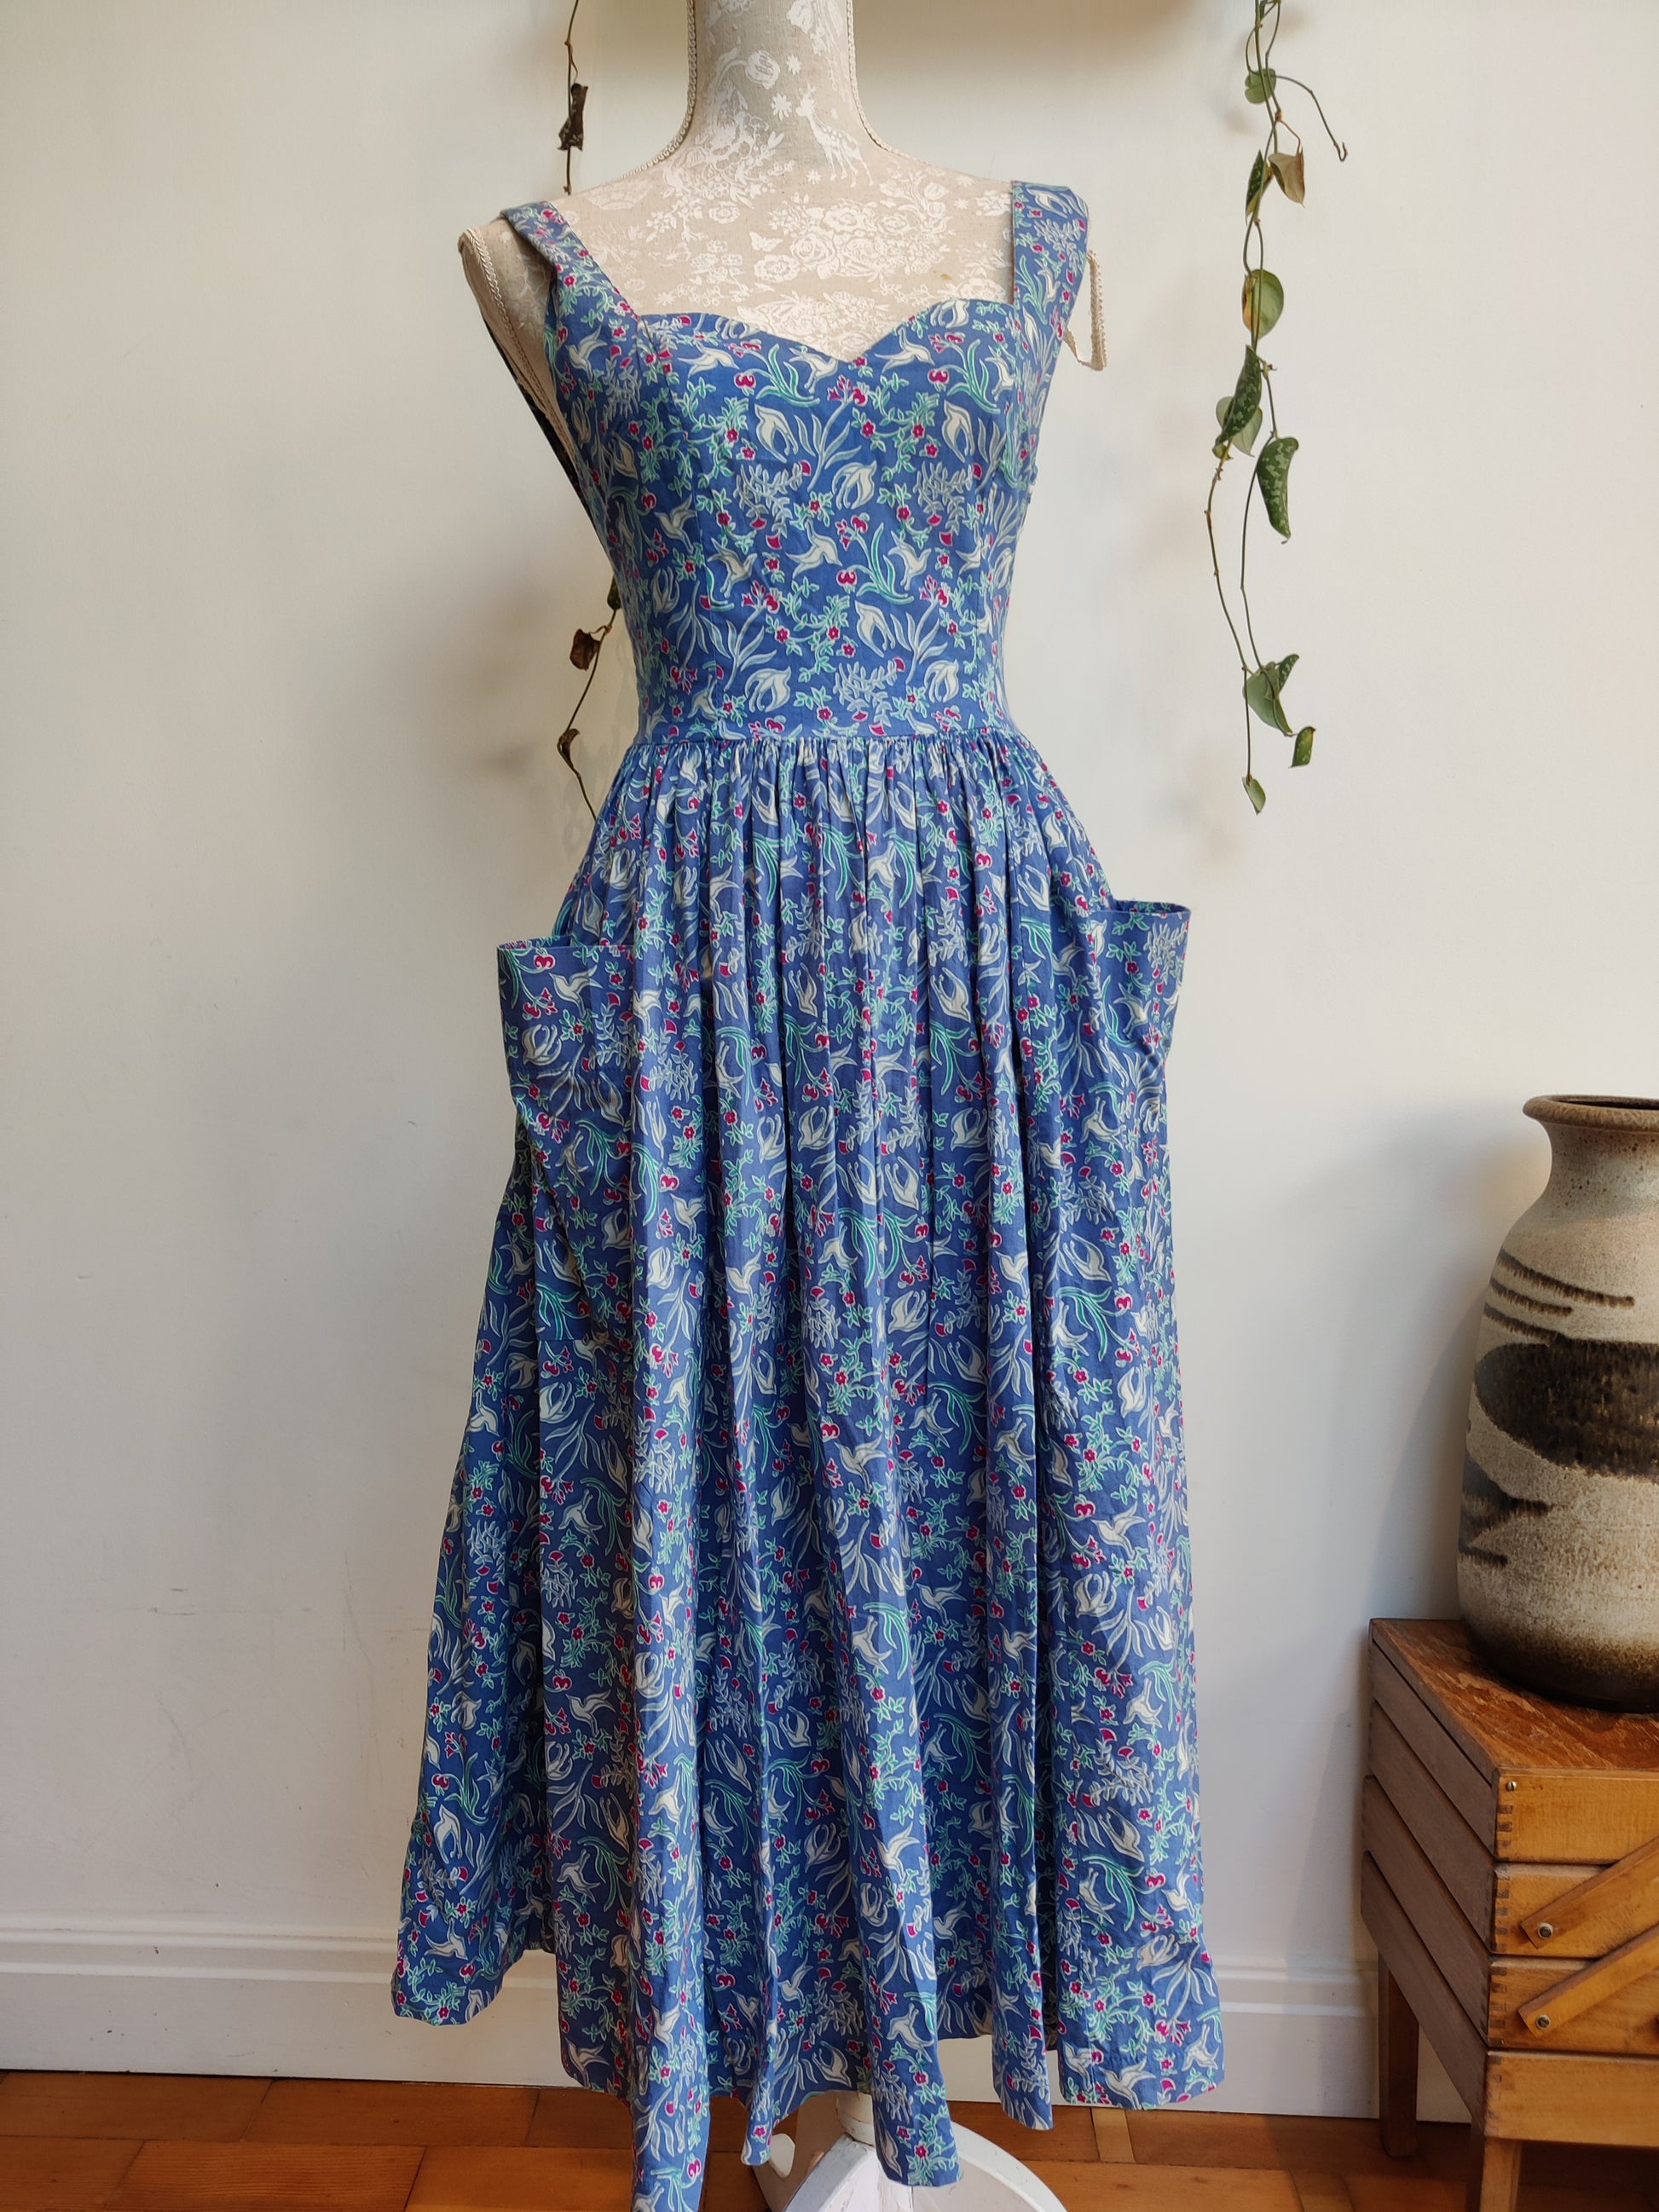 Stunning vintage Laura Ashley summer dress with white dove print. size 8